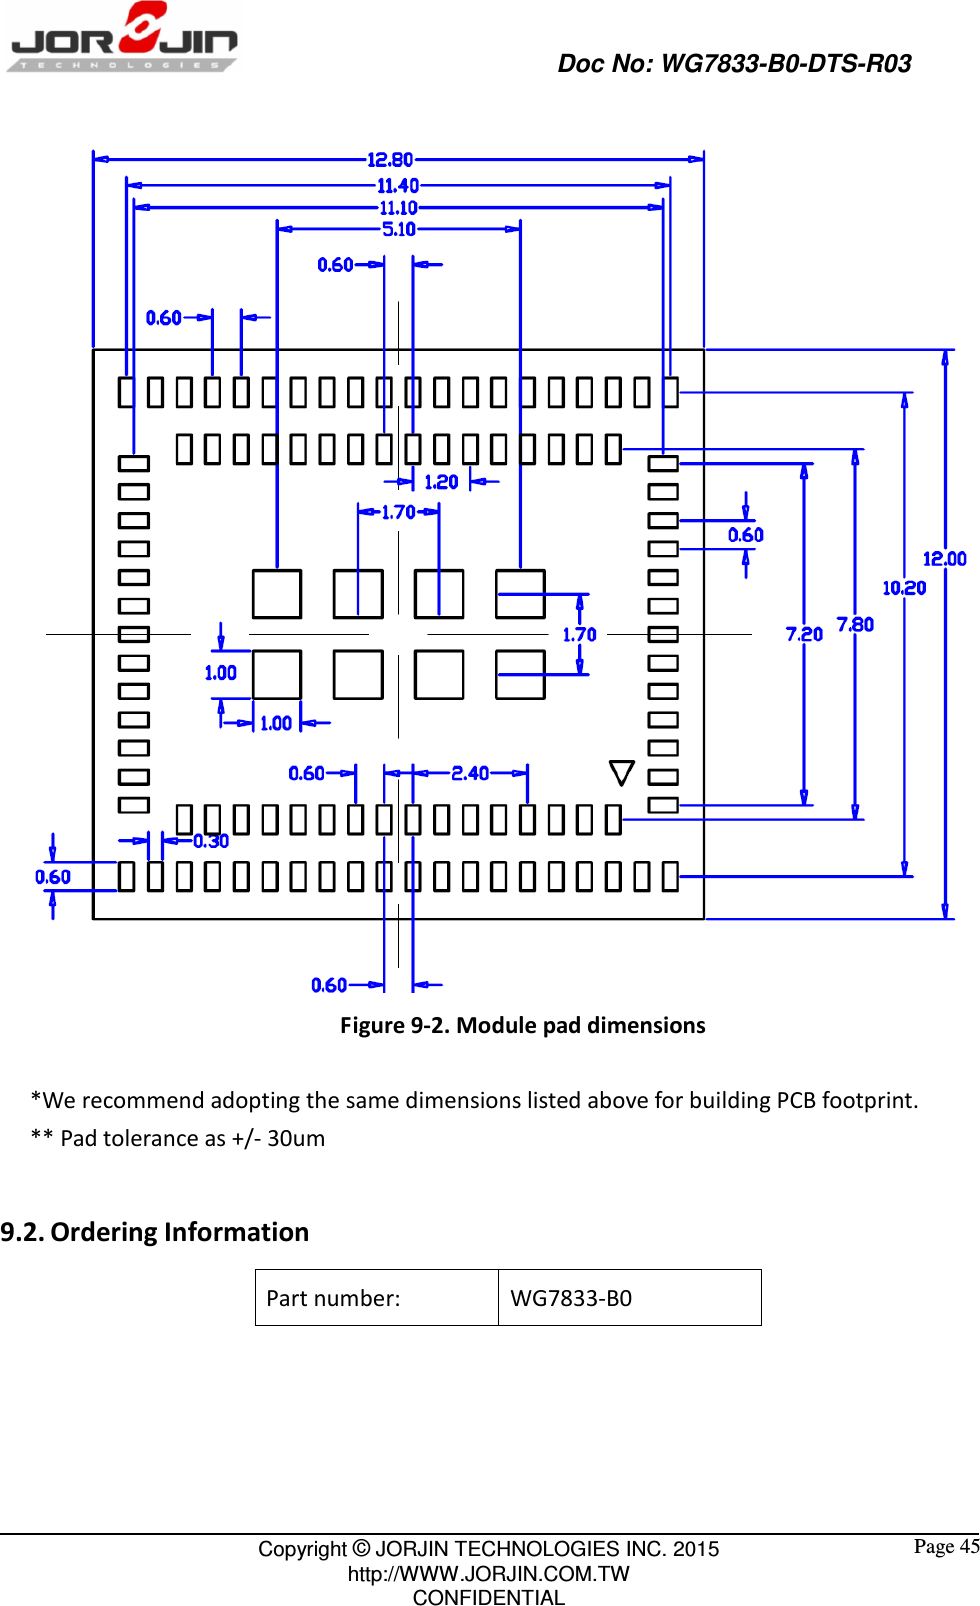                                                   Doc No: WG7833-B0-DTS-R03                                                                                                 Copyright © JORJIN TECHNOLOGIES INC. 2015 http://WWW.JORJIN.COM.TW CONFIDENTIAL  Page 45  Figure 9-2. Module pad dimensions  *We recommend adopting the same dimensions listed above for building PCB footprint. ** Pad tolerance as +/- 30um  9.2. Ordering Information Part number:  WG7833-B0     